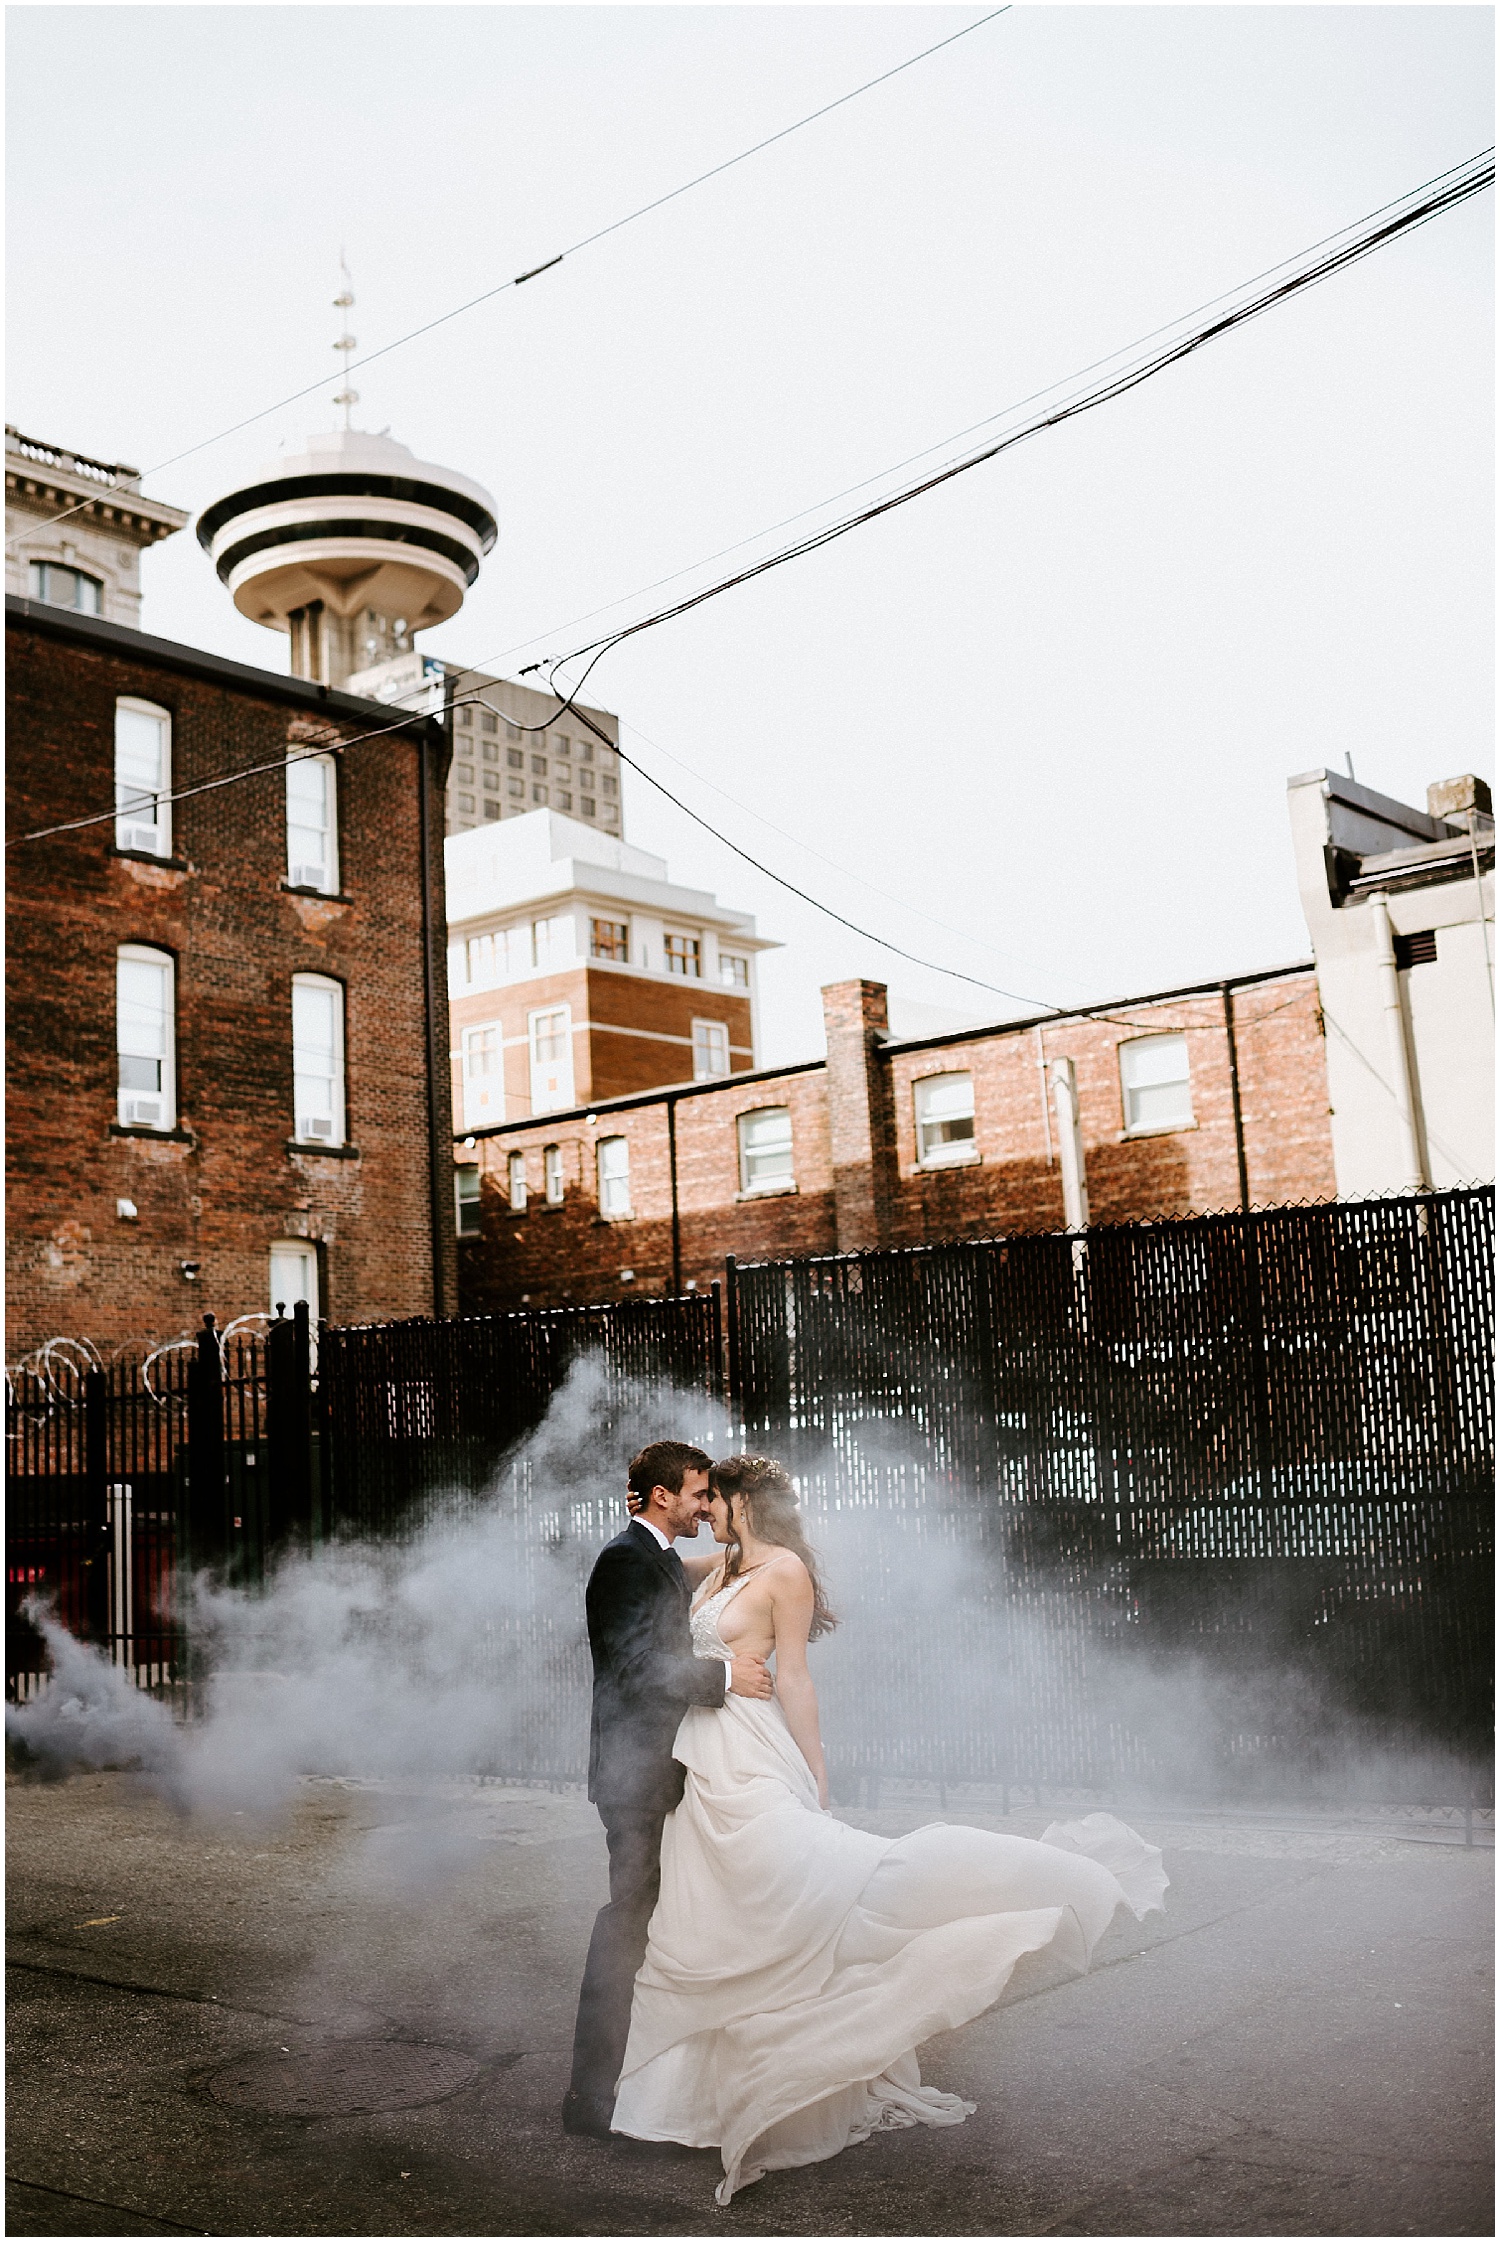 downtown vancouver urban wedding photo back alley couple manhole steam